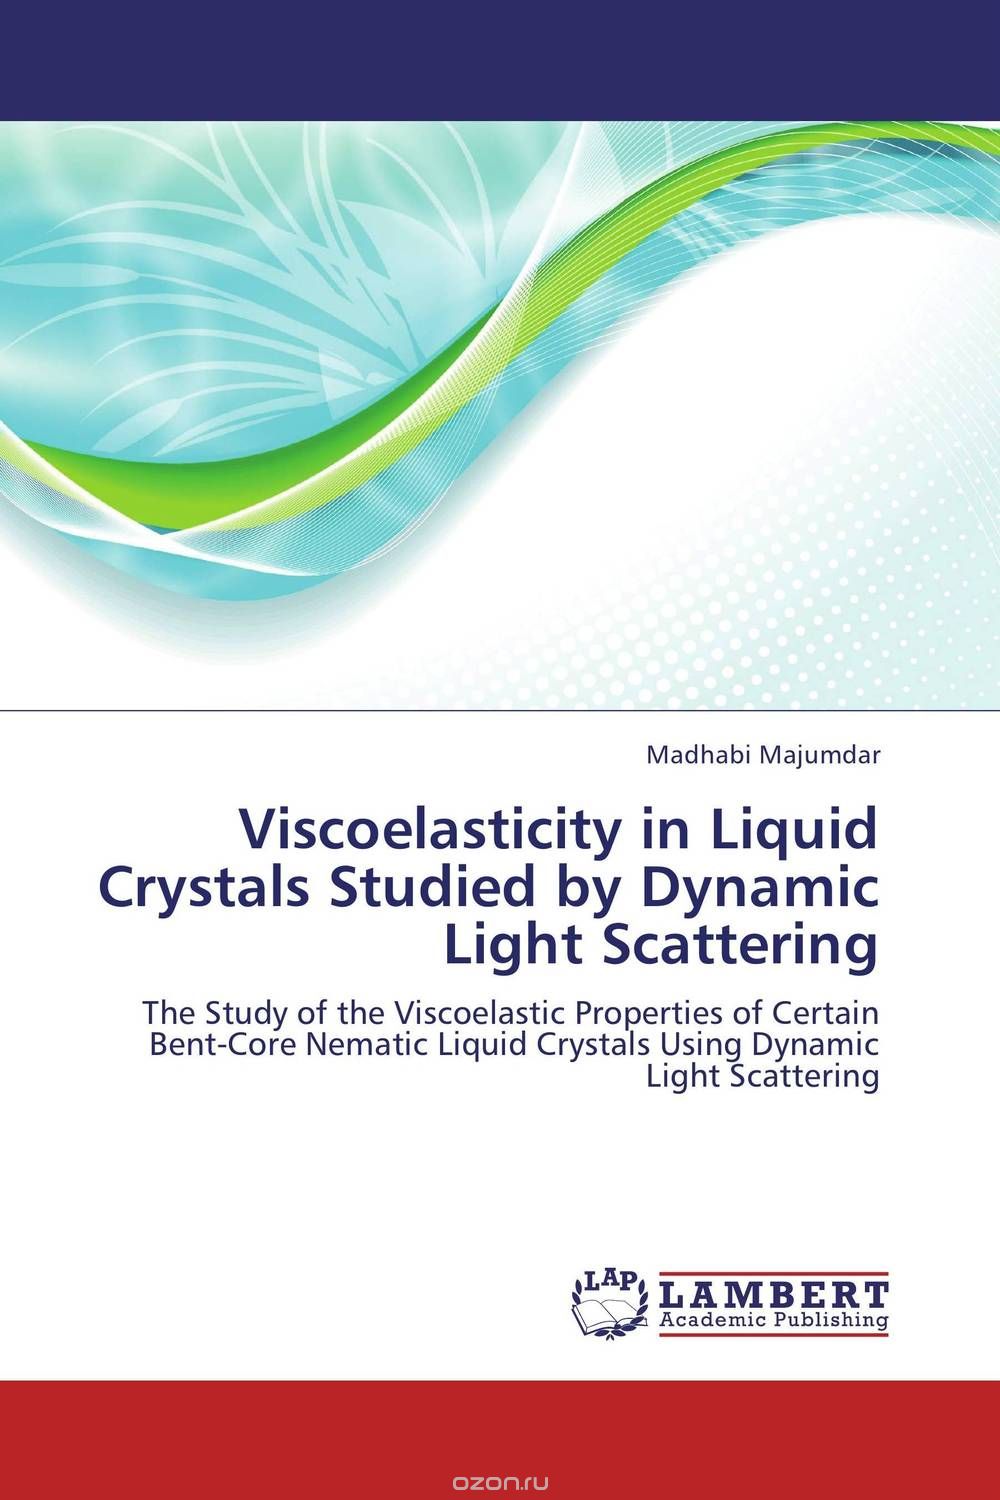 Viscoelasticity in Liquid Crystals Studied by Dynamic Light Scattering